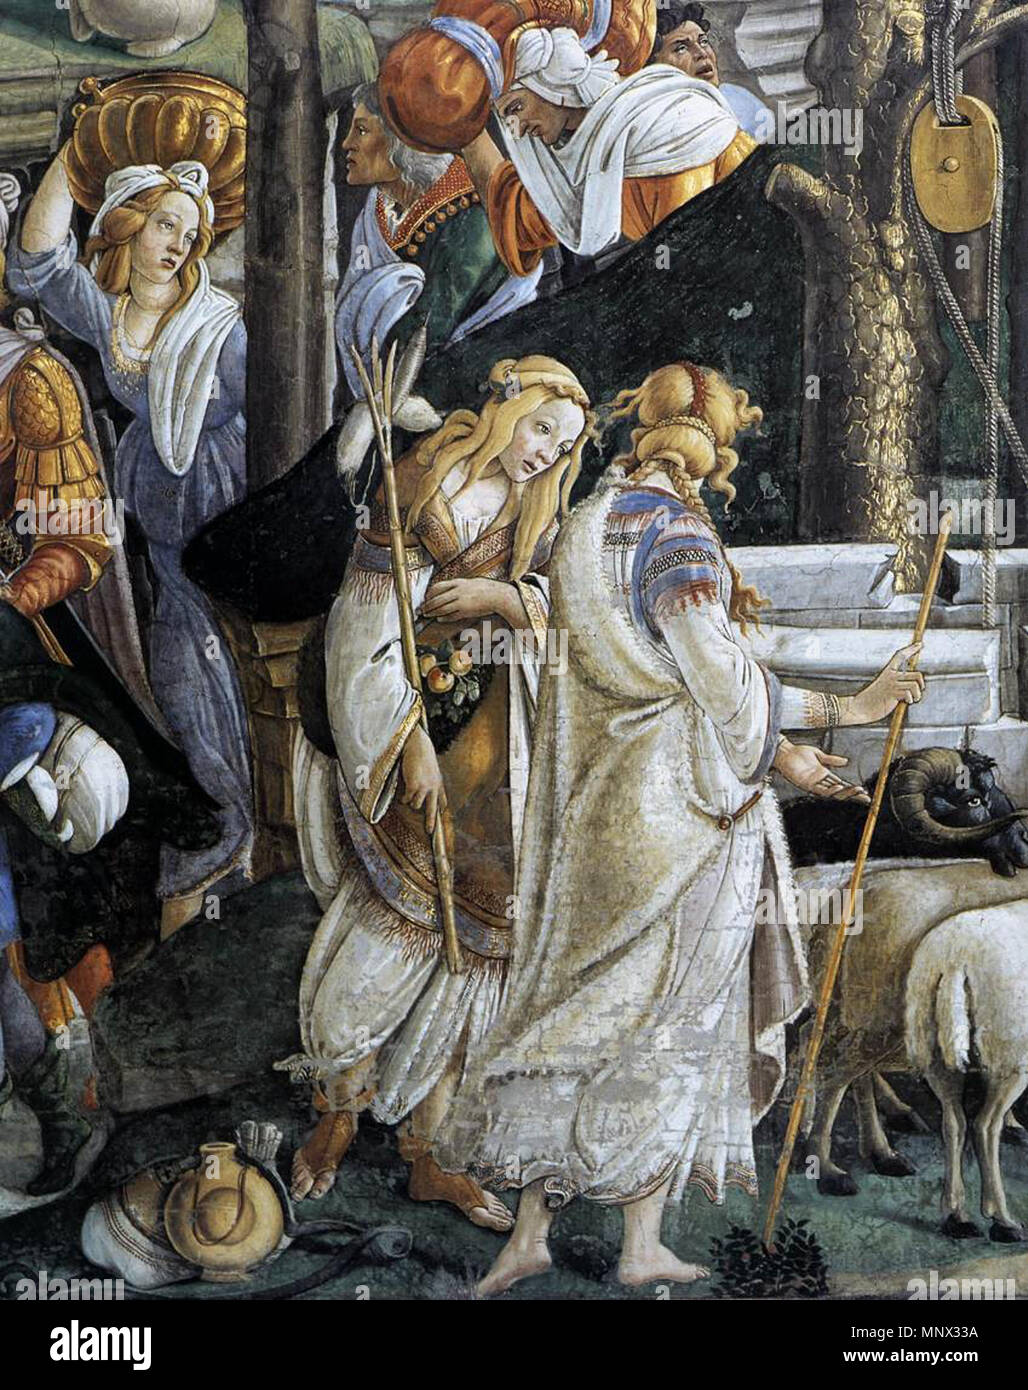 The Trials and Calling of Moses (detail)   between 1481 and 1482.   1093 Sandro Botticelli - The Trials and Calling of Moses (detail) - WGA2740 Stock Photo